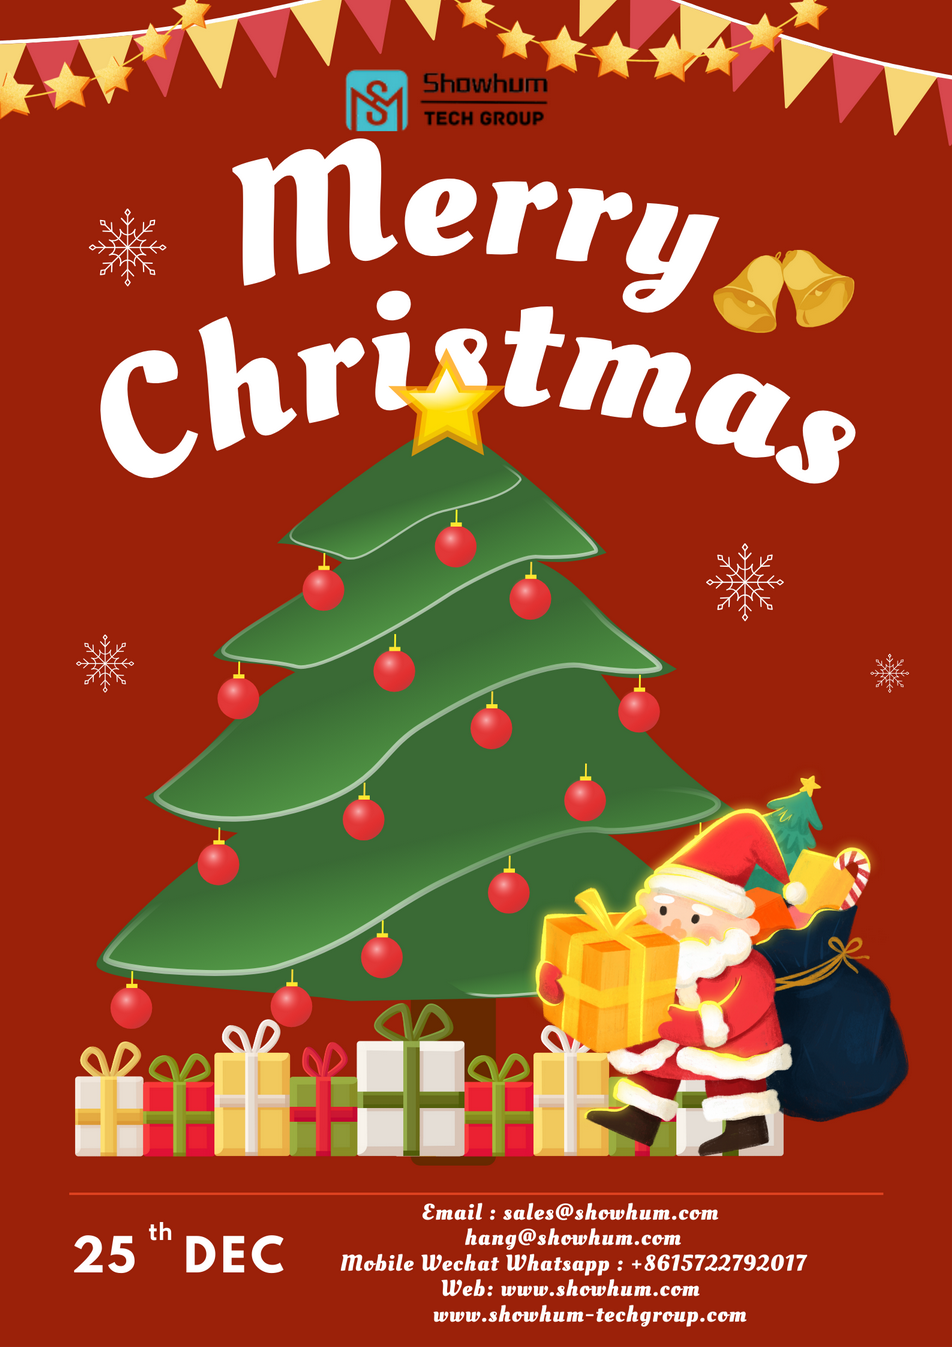 The Gift of Quality SHOWHUM TECH GROUP Wishes You a Merry Christmas